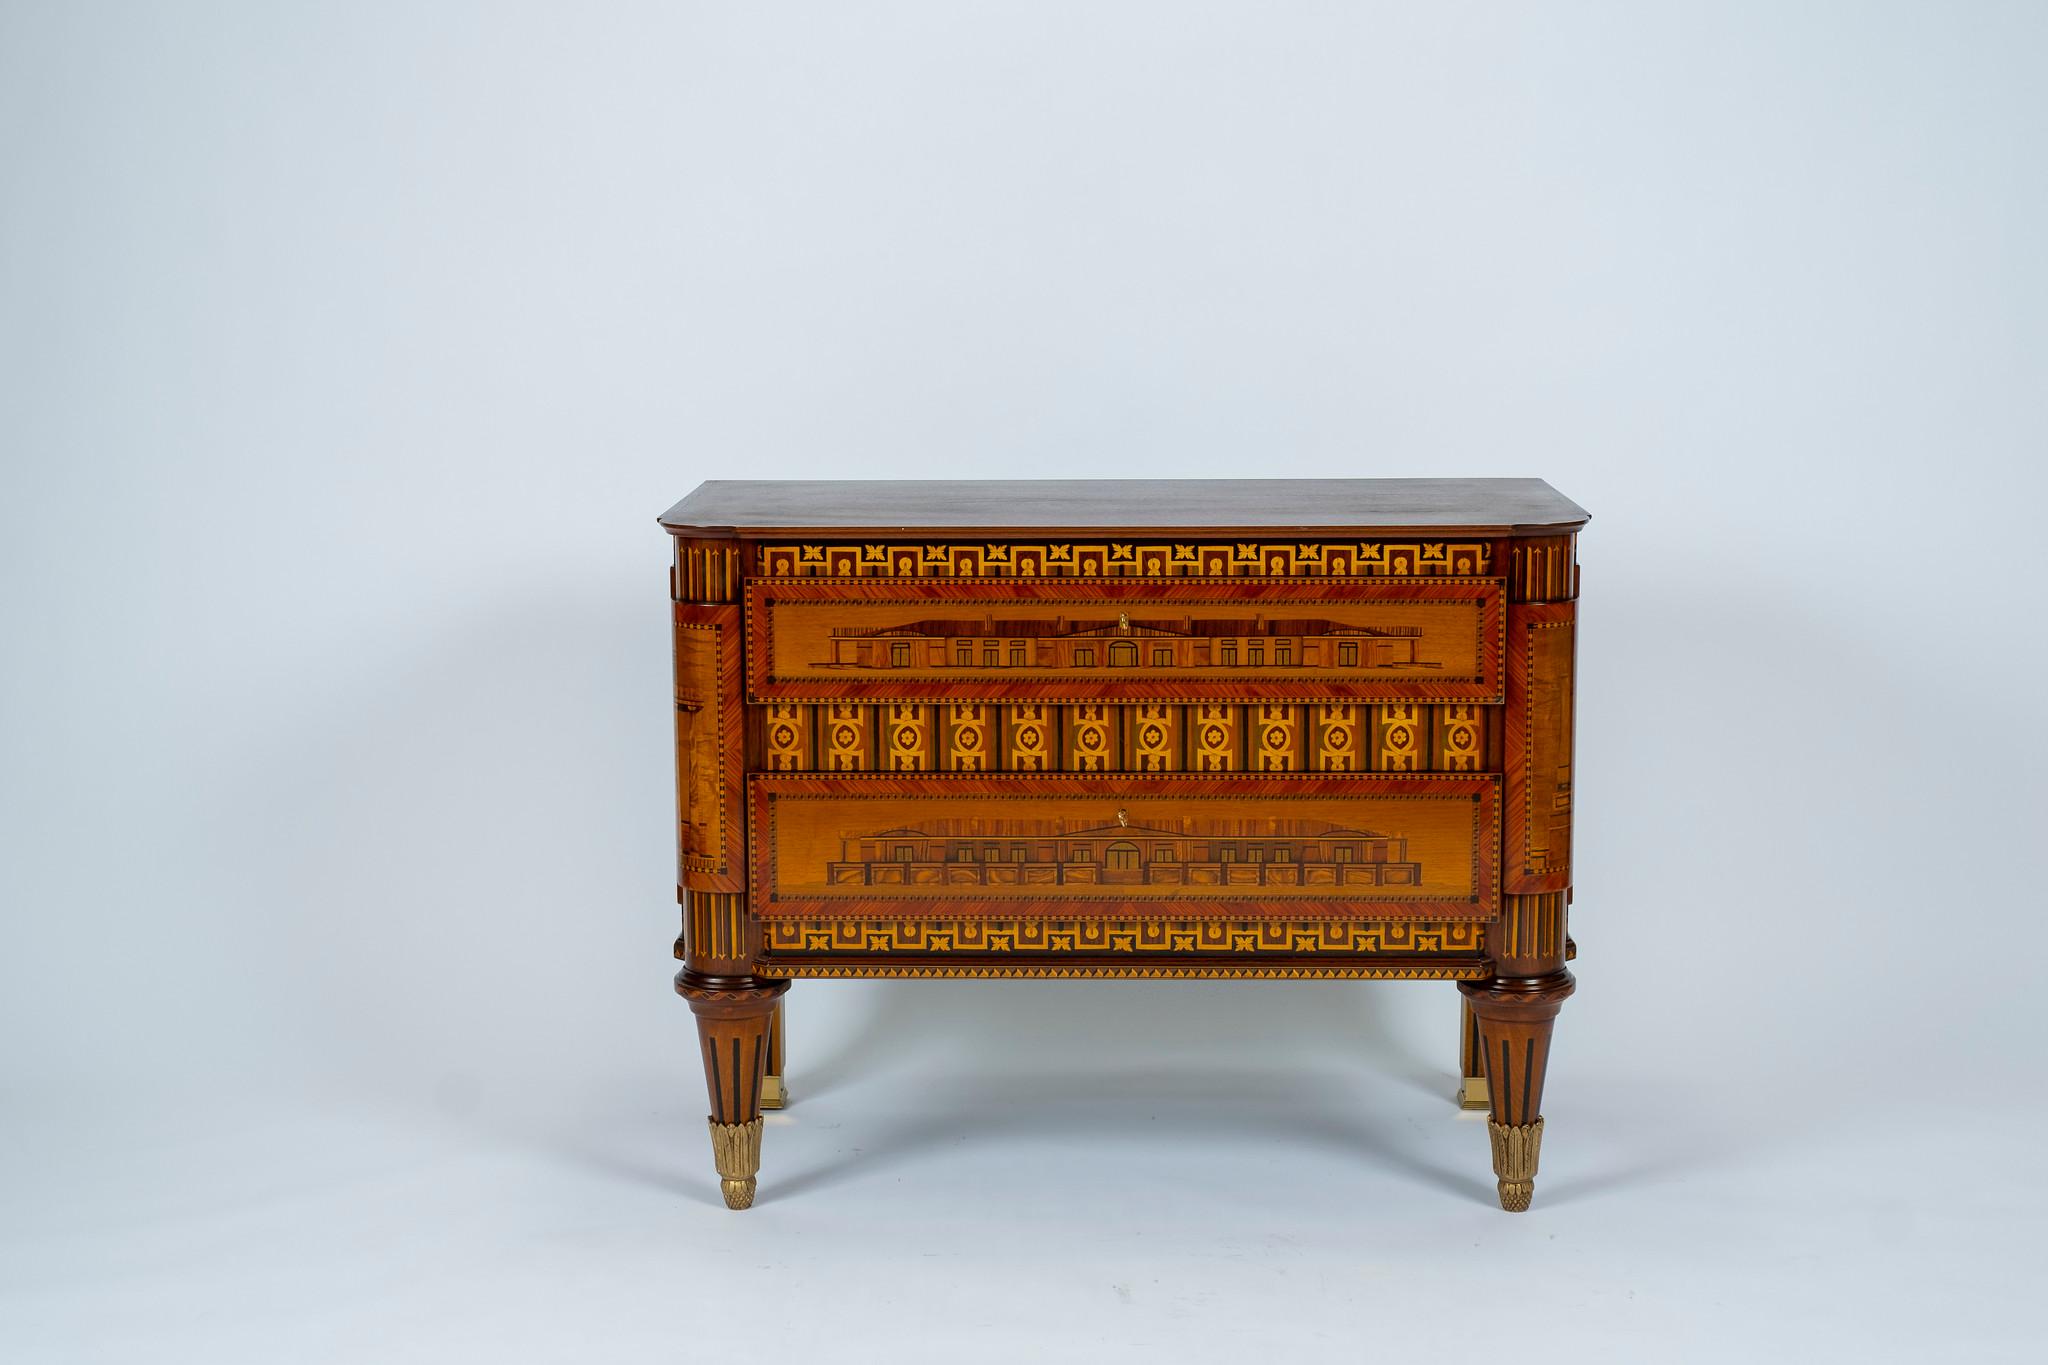 Available are two Russian neoclassical style commodes, sold individually. These cabinets are an outstanding example of a select group of pieces decorated with architectural views, many of which are attributed to Nikifor Vasilyev, a St. Petersburg